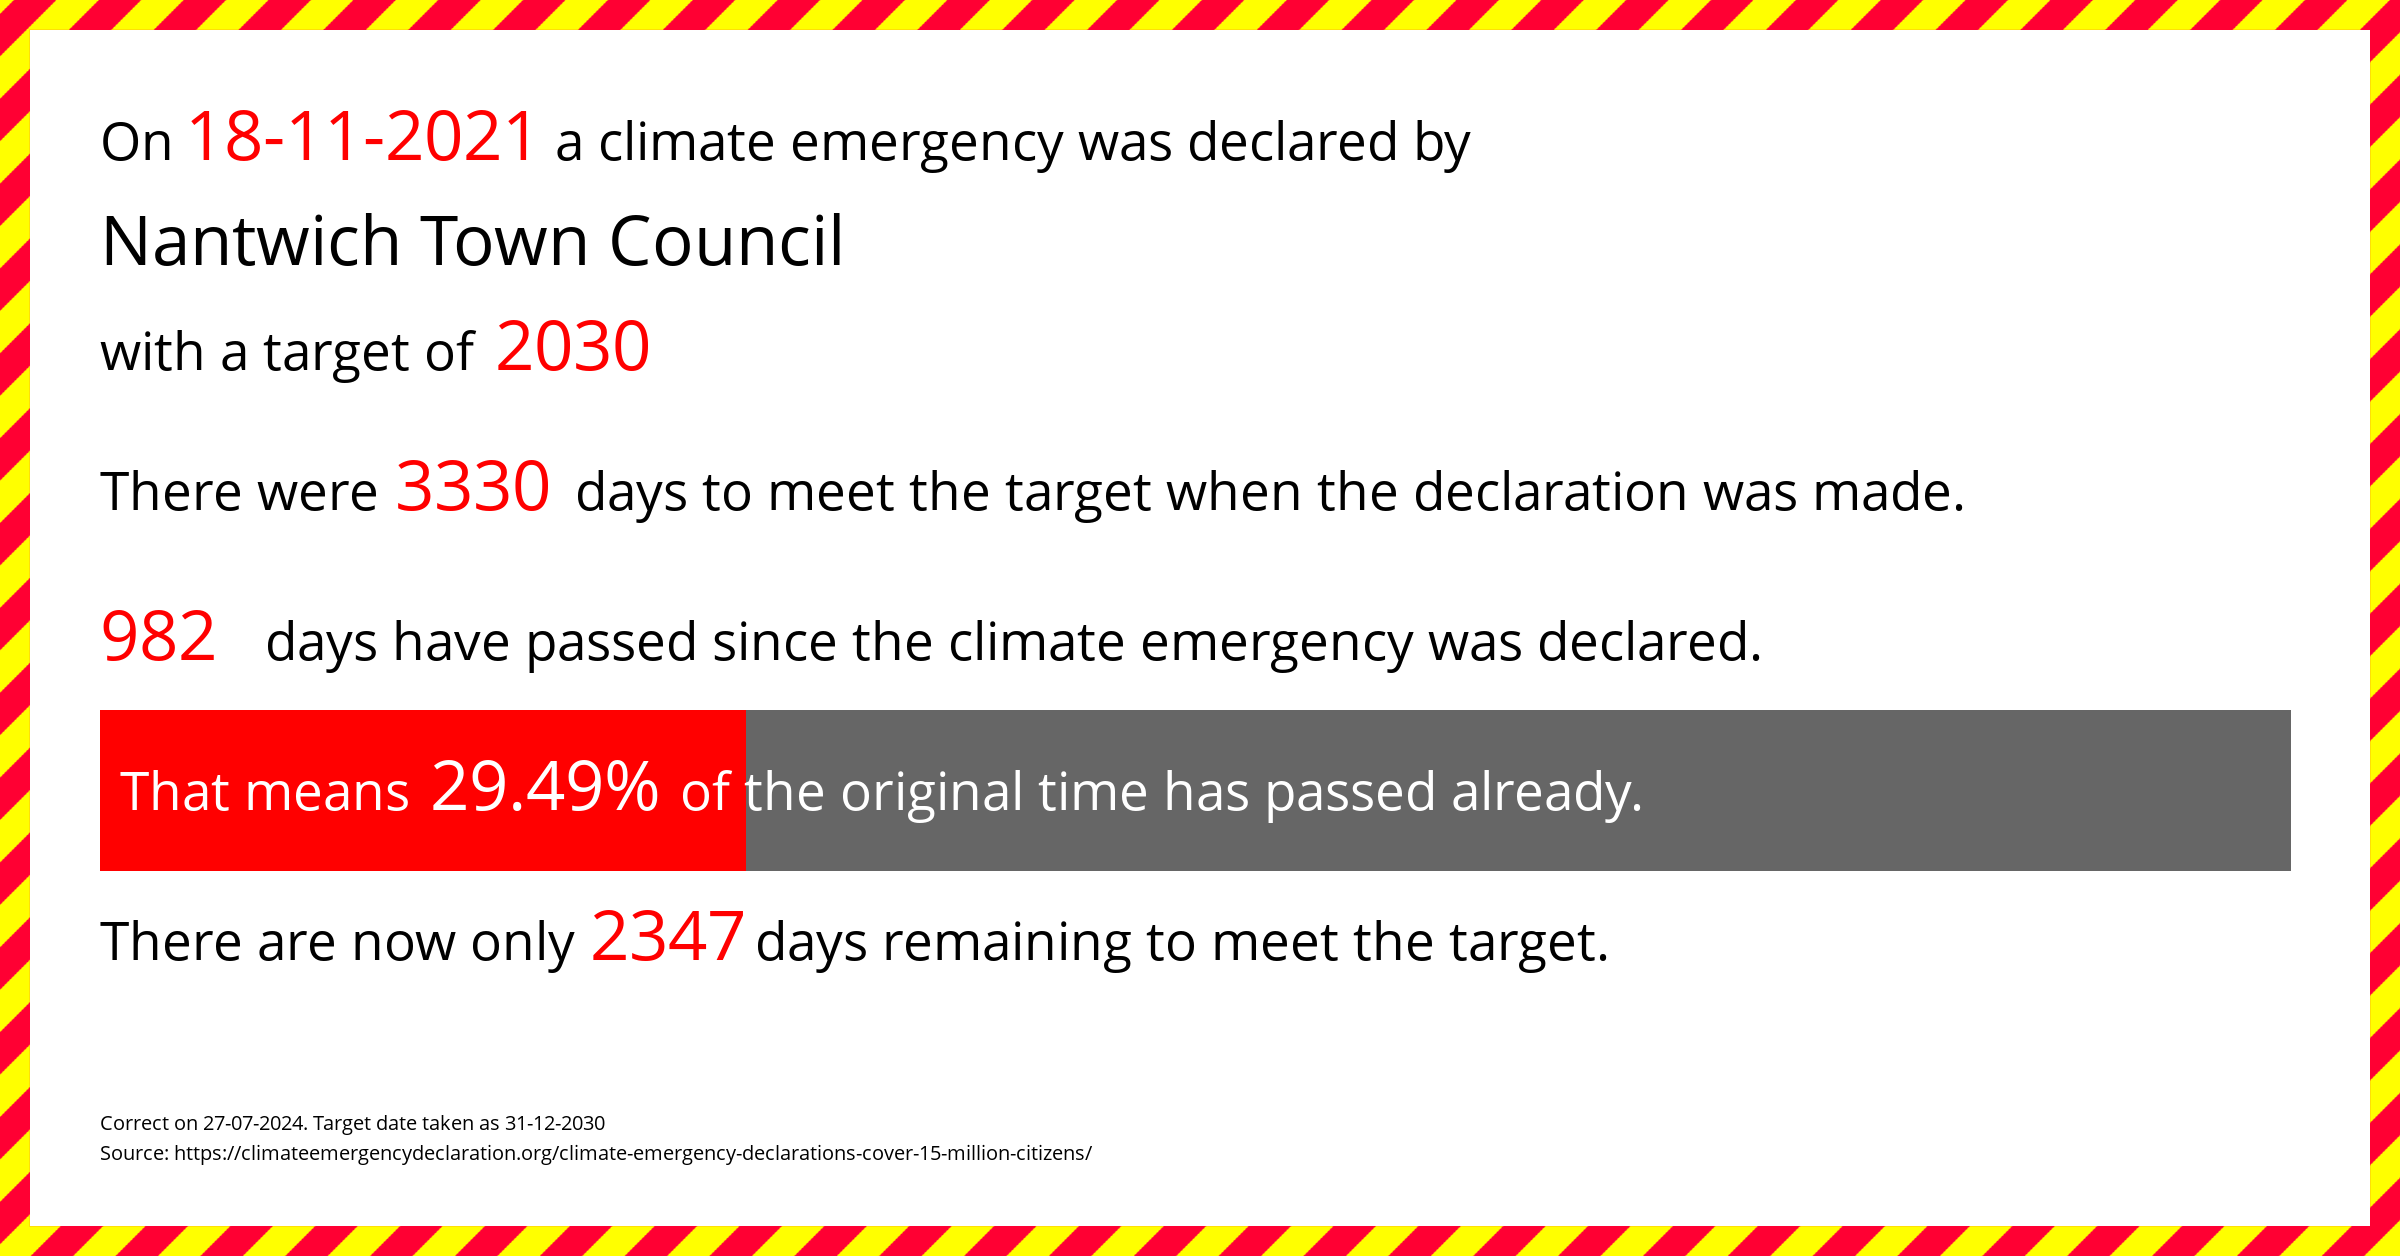 Nantwich Town Council declared a Climate emergency on Thursday 18th November 2021, with a target of 2030.